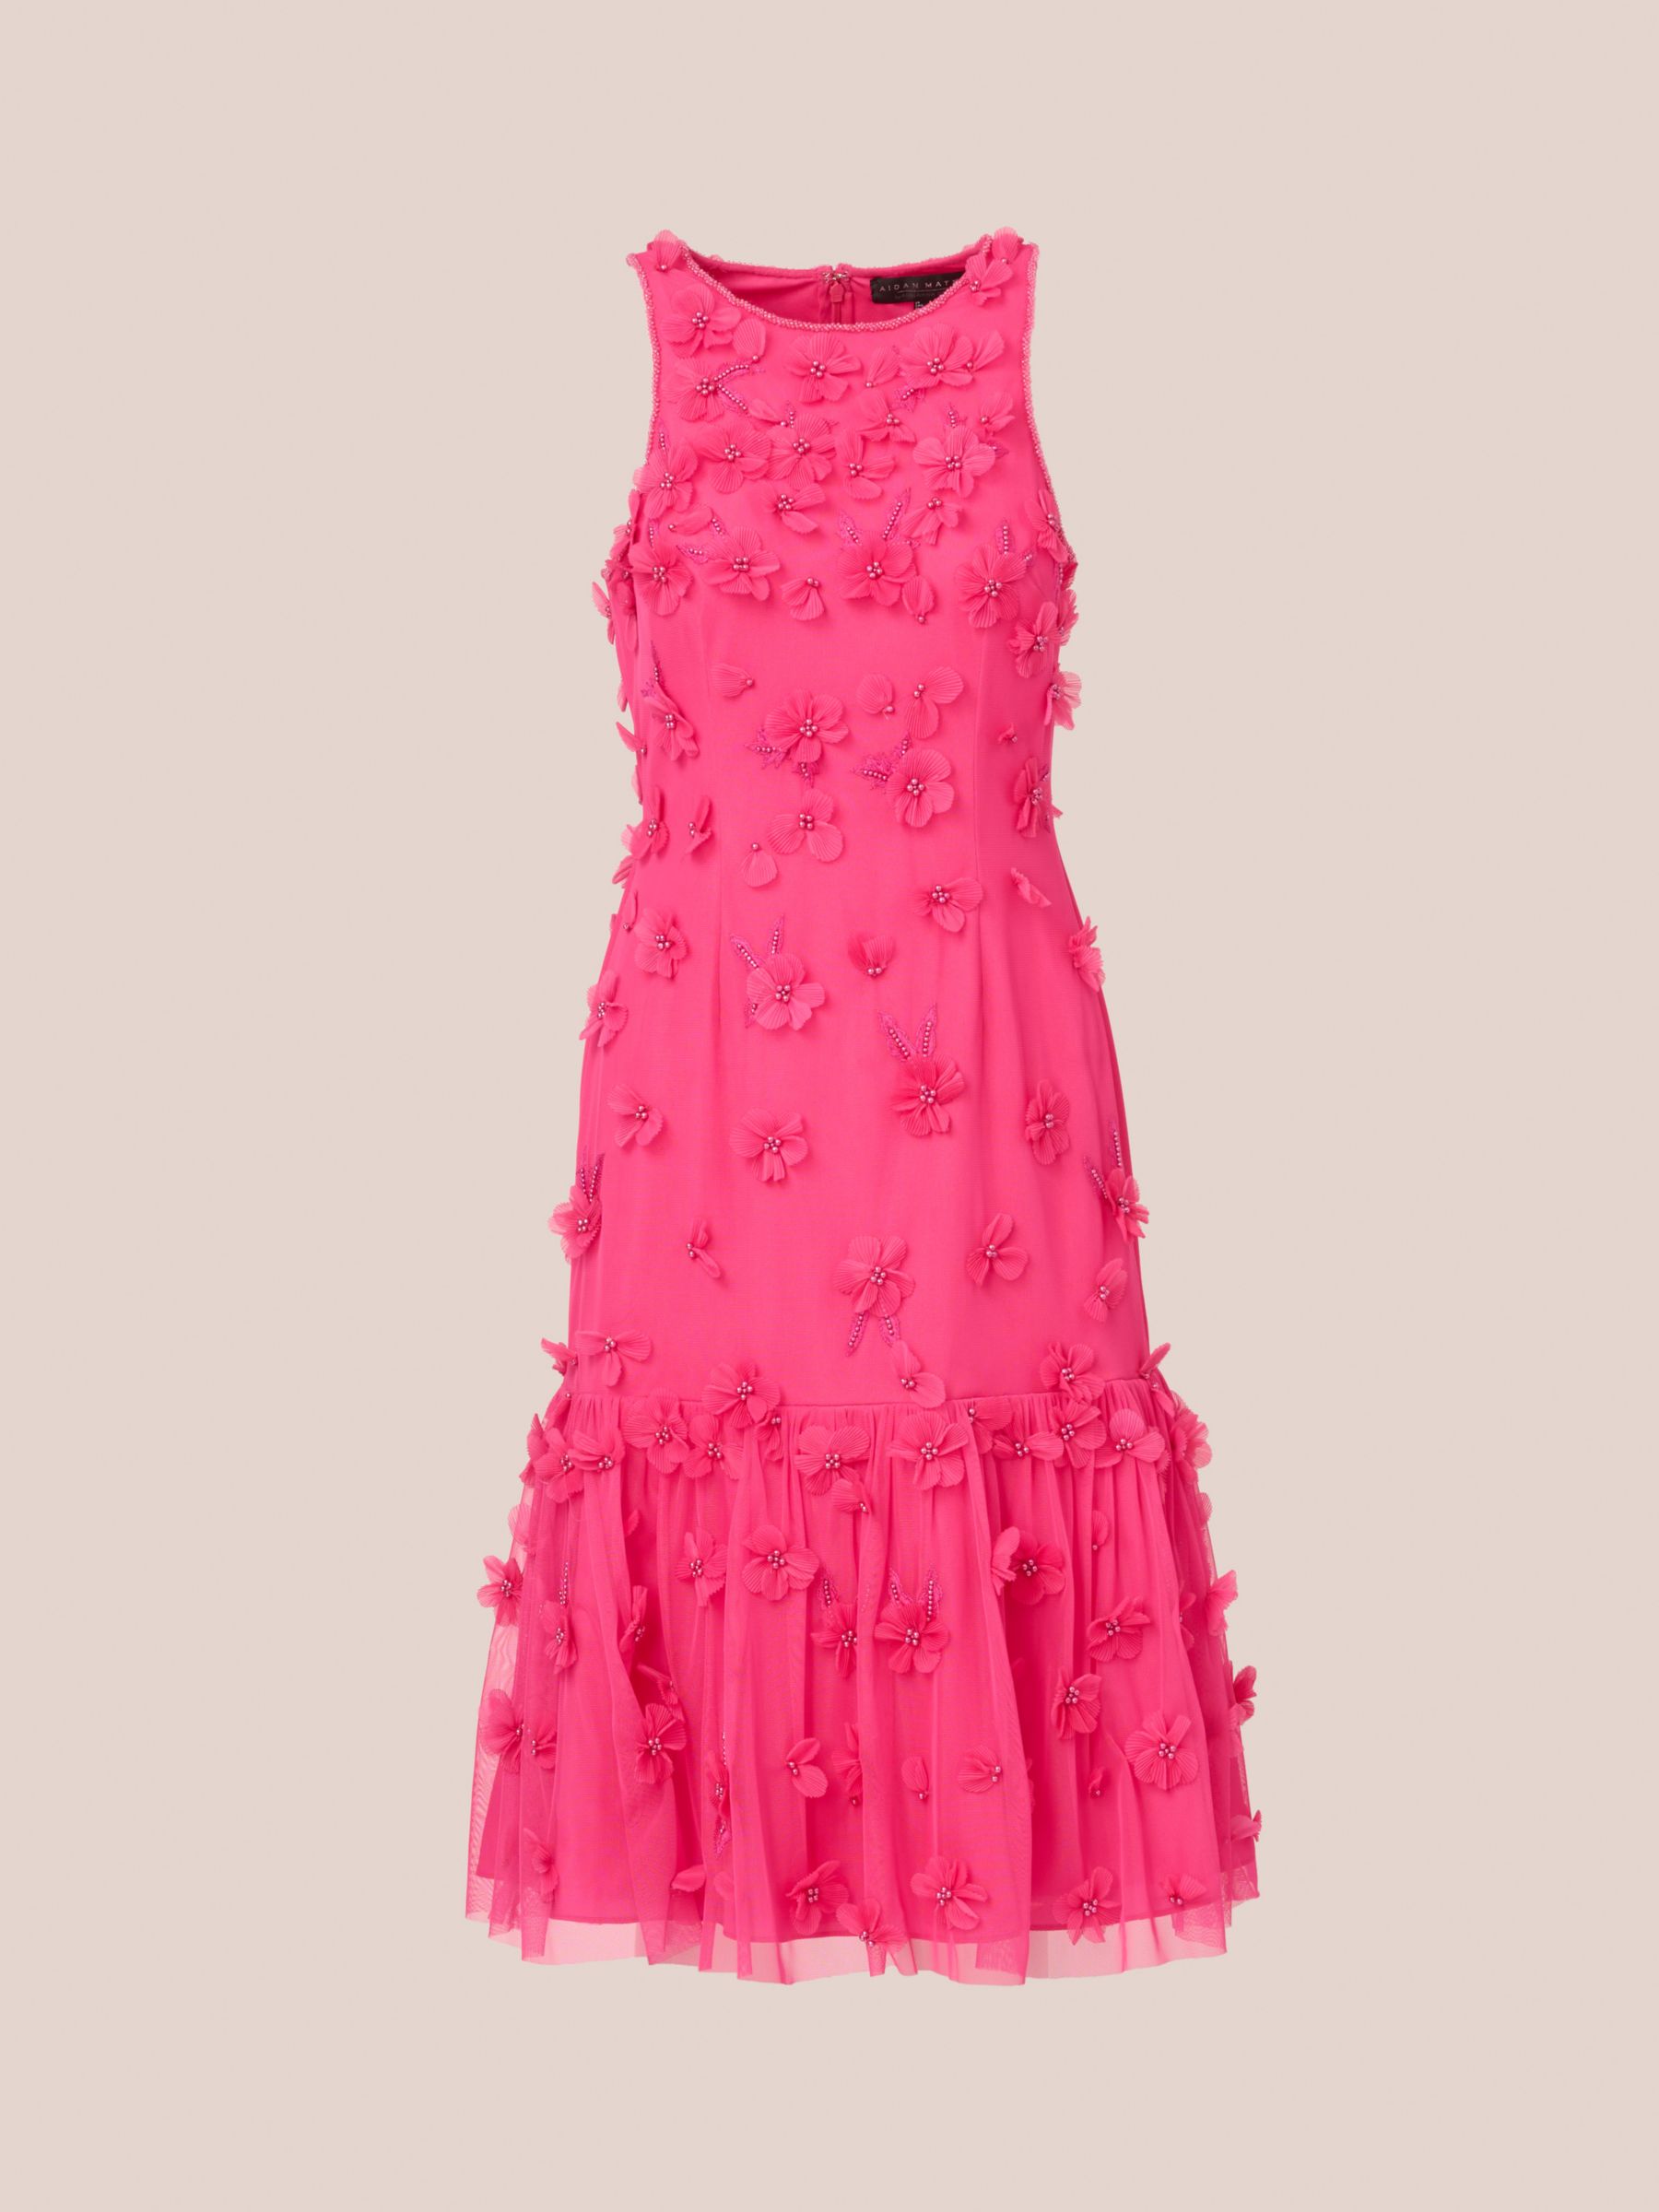 Aidan Mattox by Adrianna Papell Embellishment Cocktail Dress, Electric Pink, 6